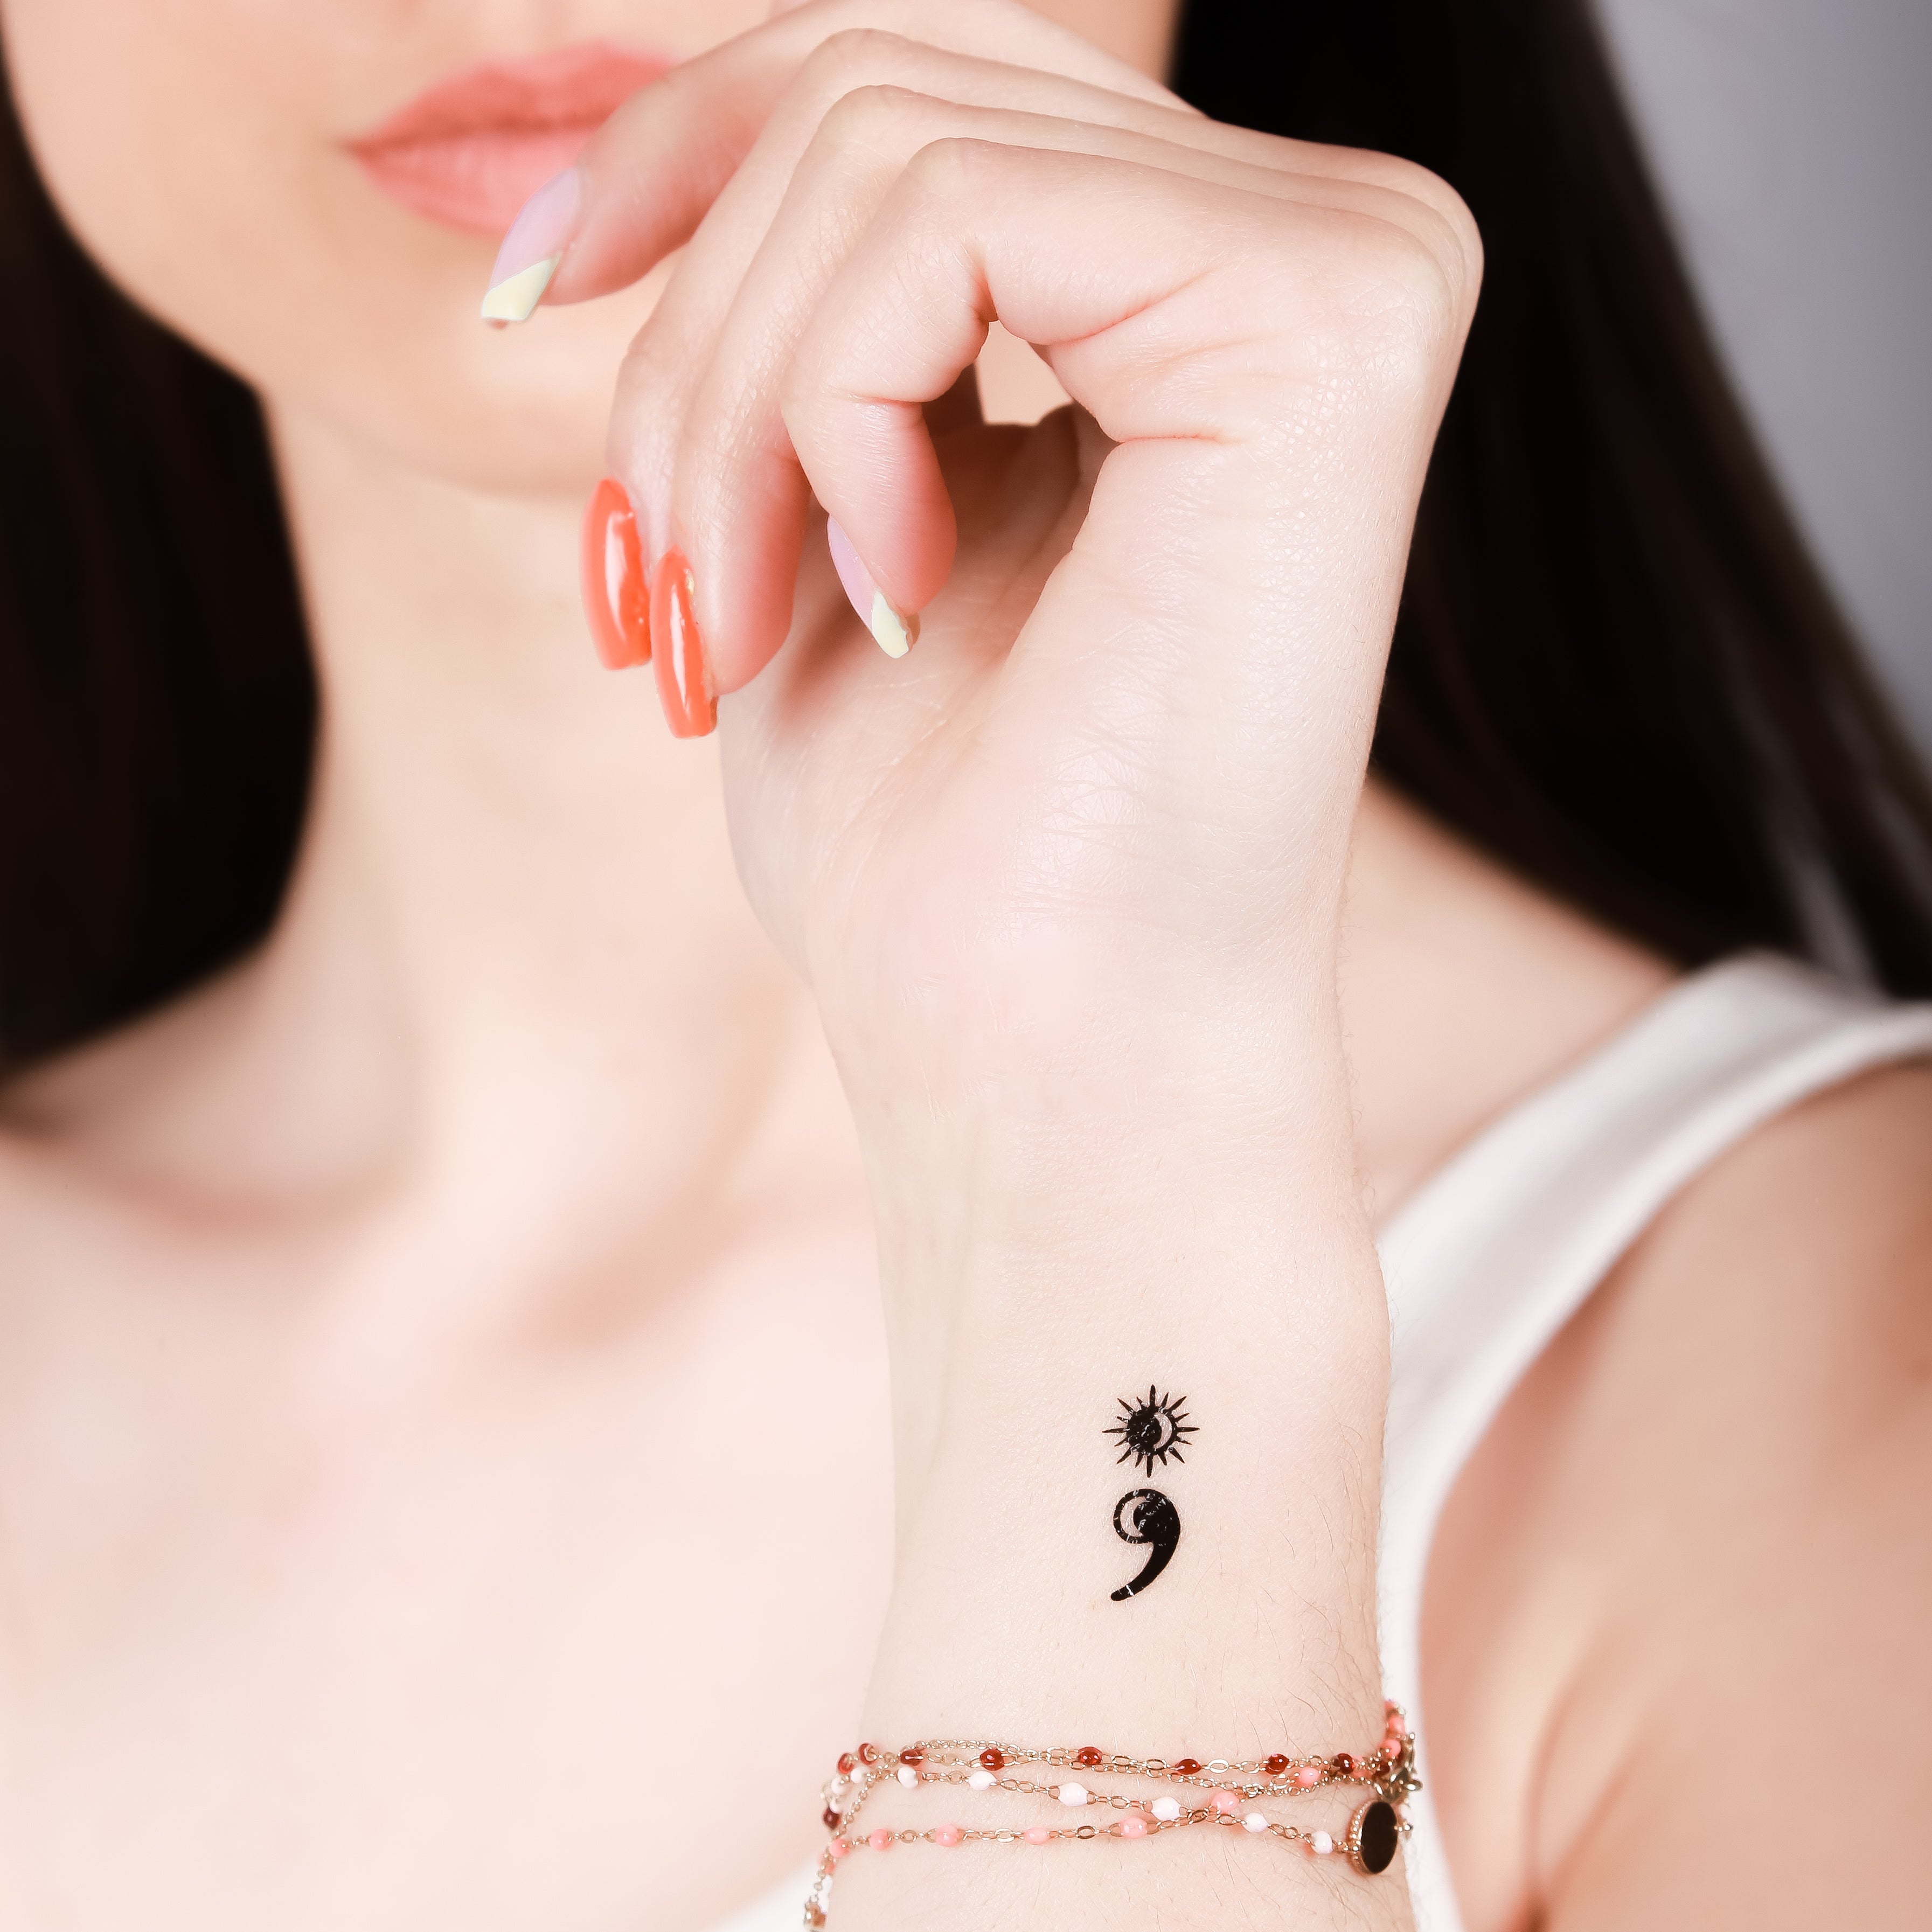 bh1703 1 Piece Stick N Poke Black Henna Tattoo With Semicolon ,et, Daily  Pattern Temporary Tattoo For Hands Stickers - Temporary Tattoos - AliExpress